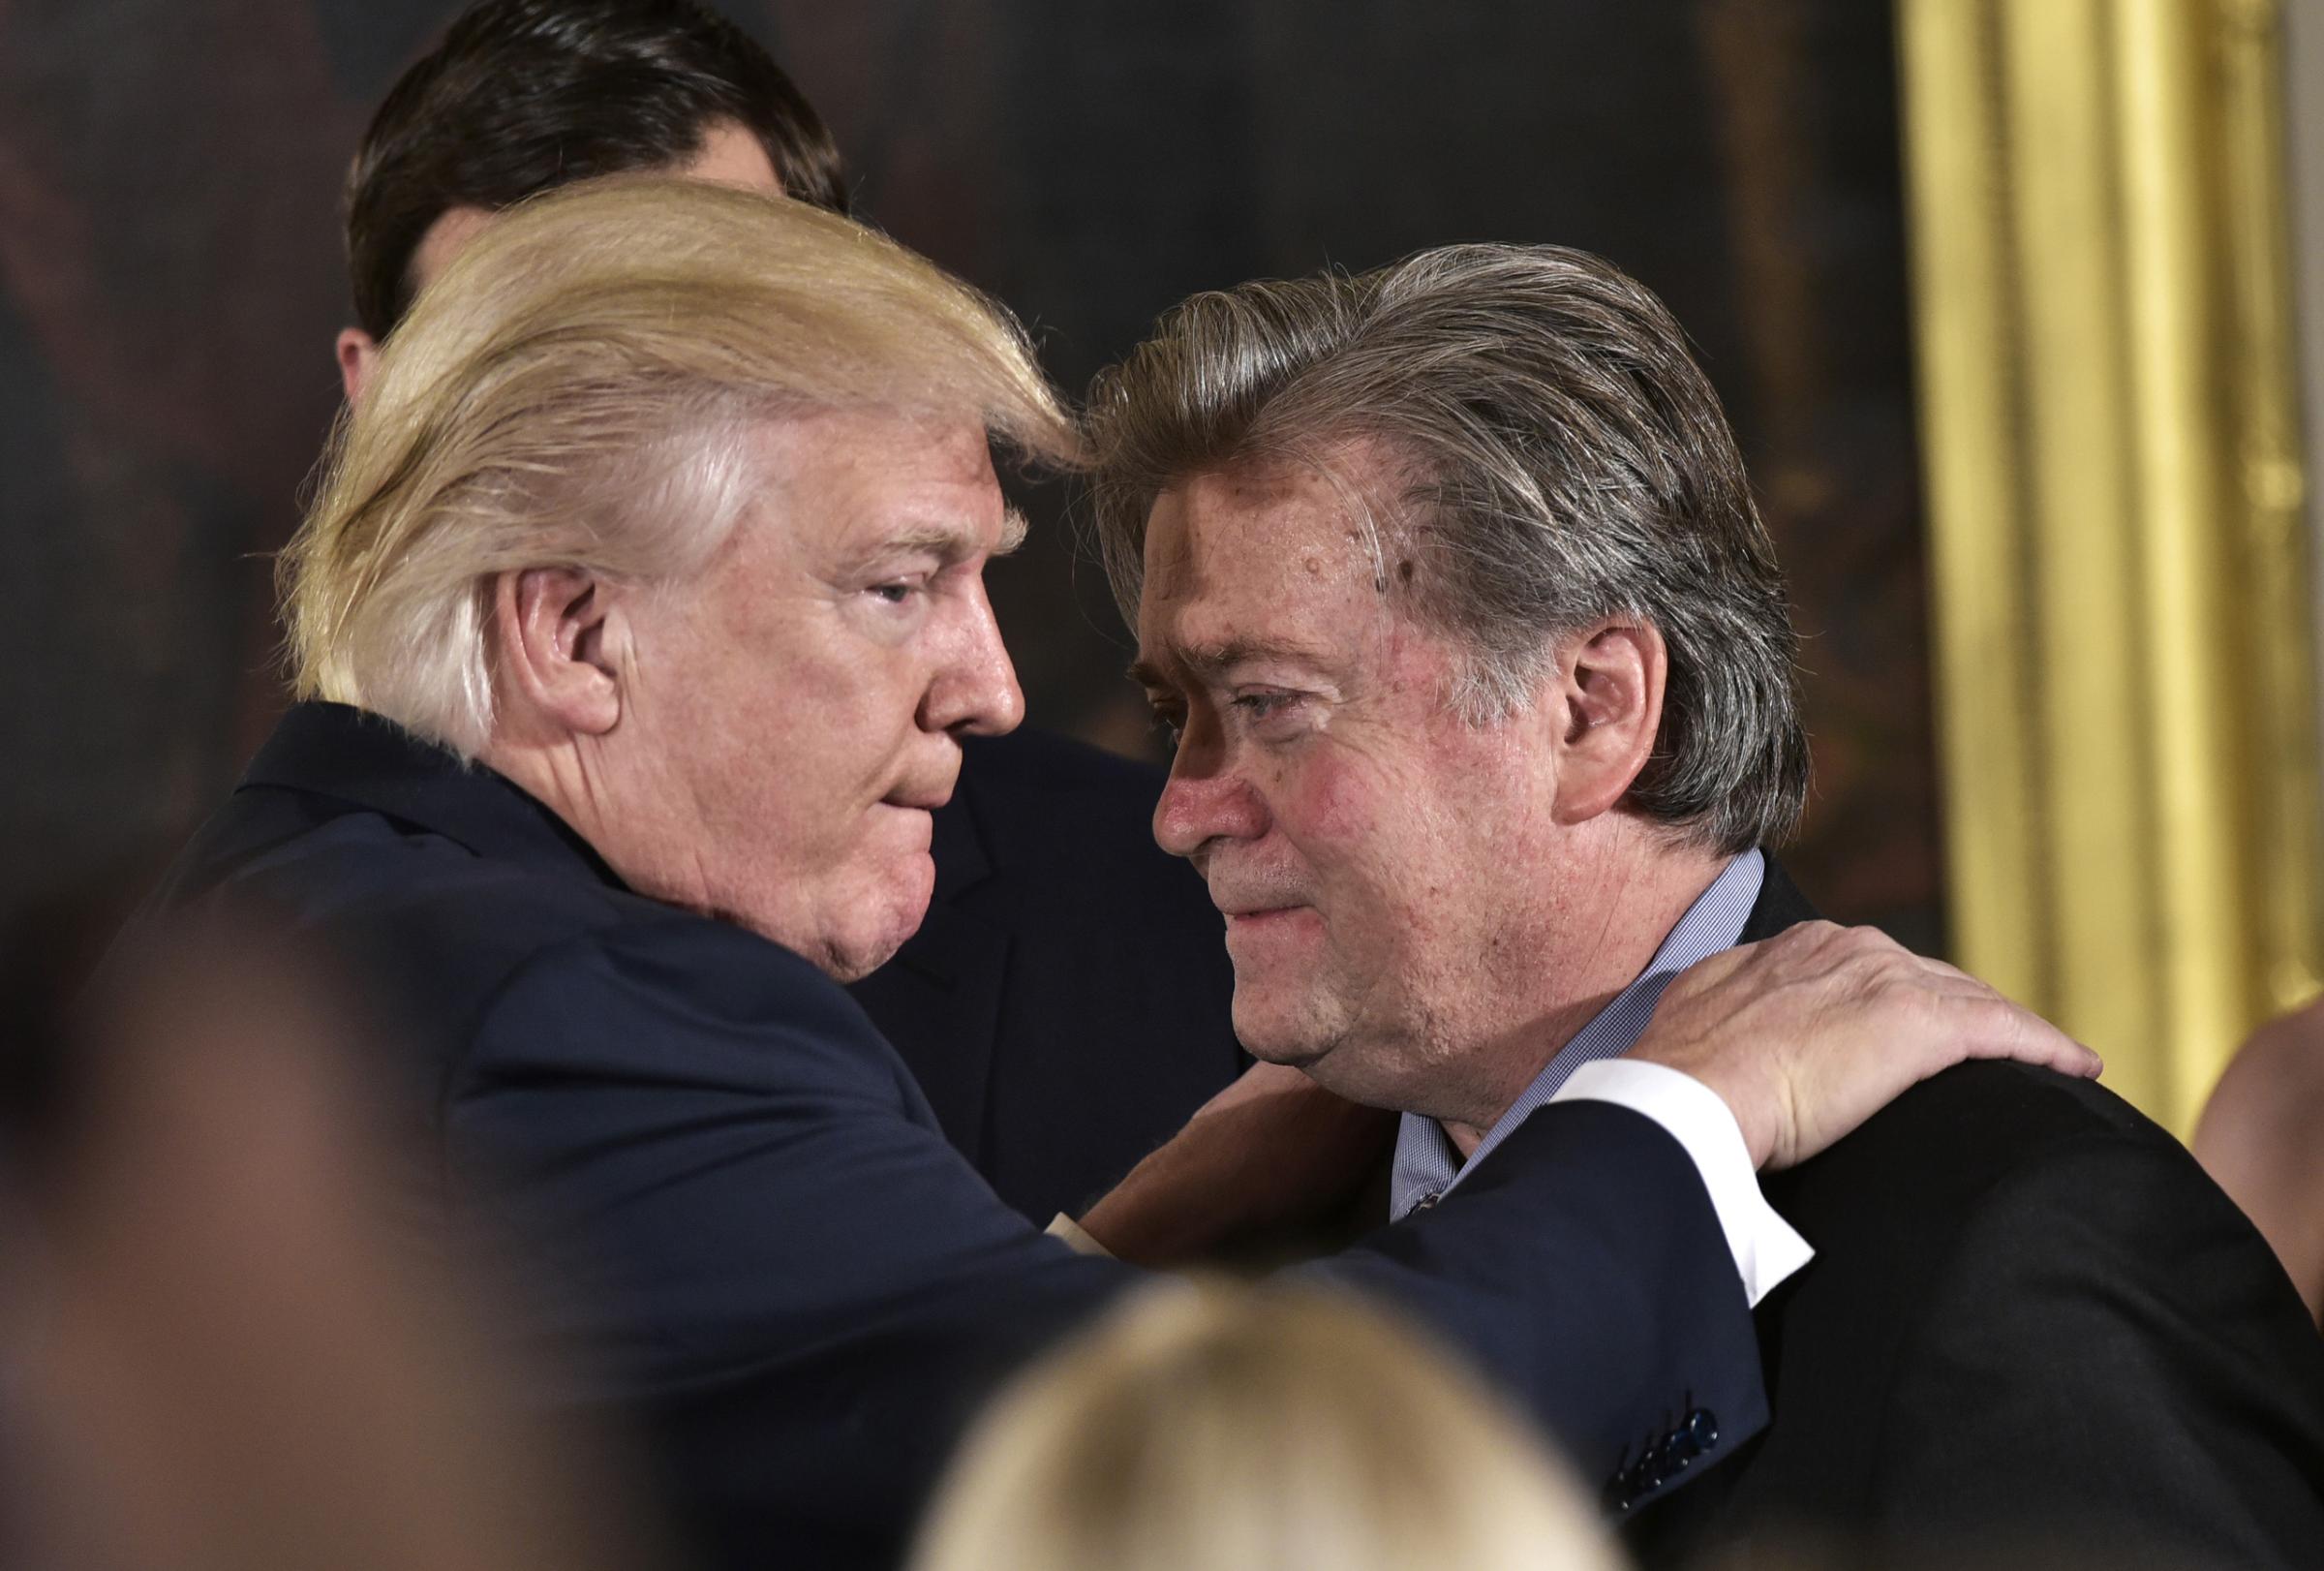 President Trump congratulates Bannon during the swearing-in of senior staff in the East Room of the White House, Jan. 22, 2017.